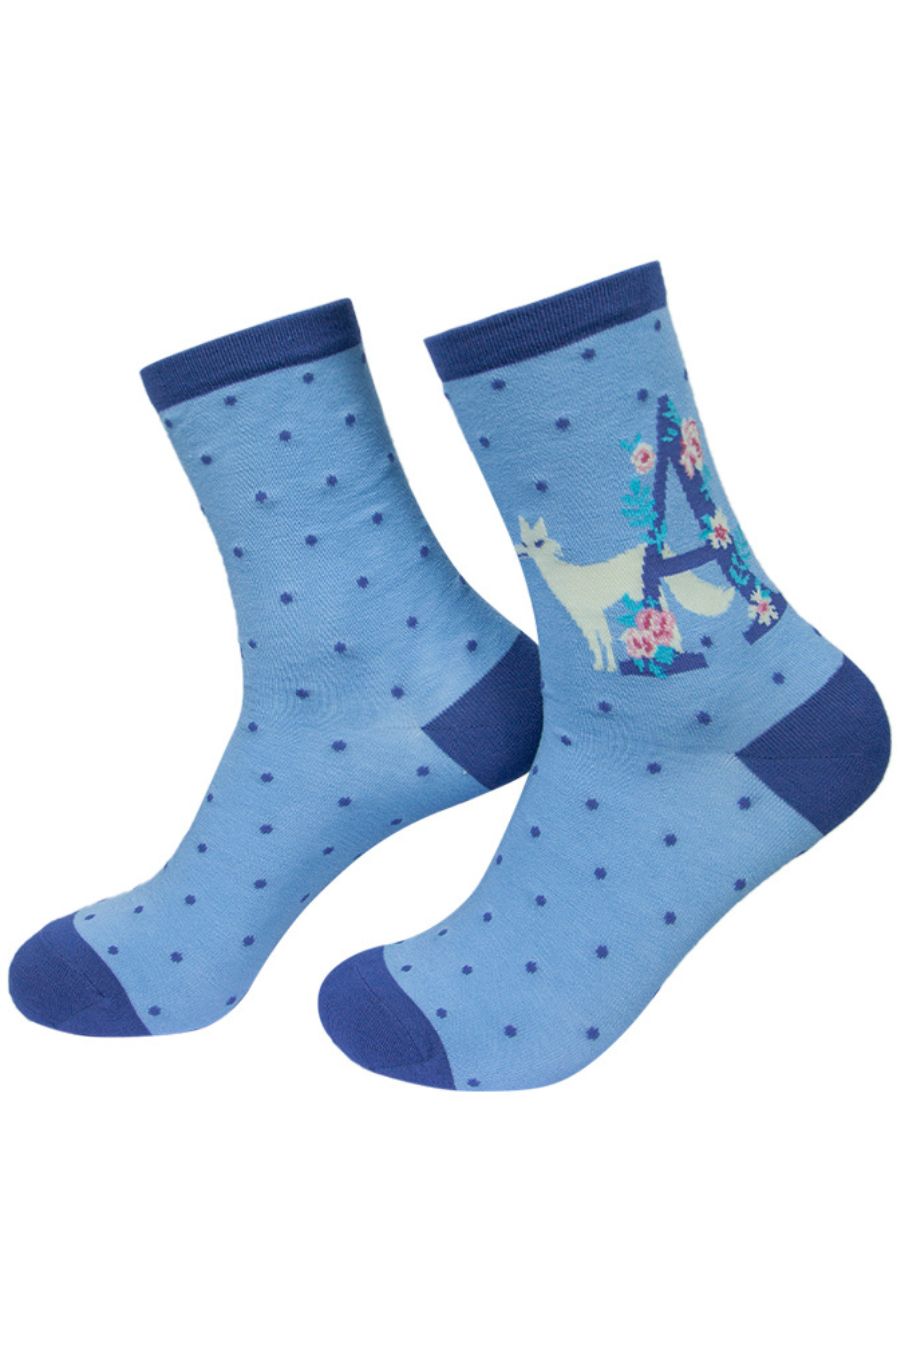 blue socks with a large letter a, an alpaca and a floral pattern on the ankle